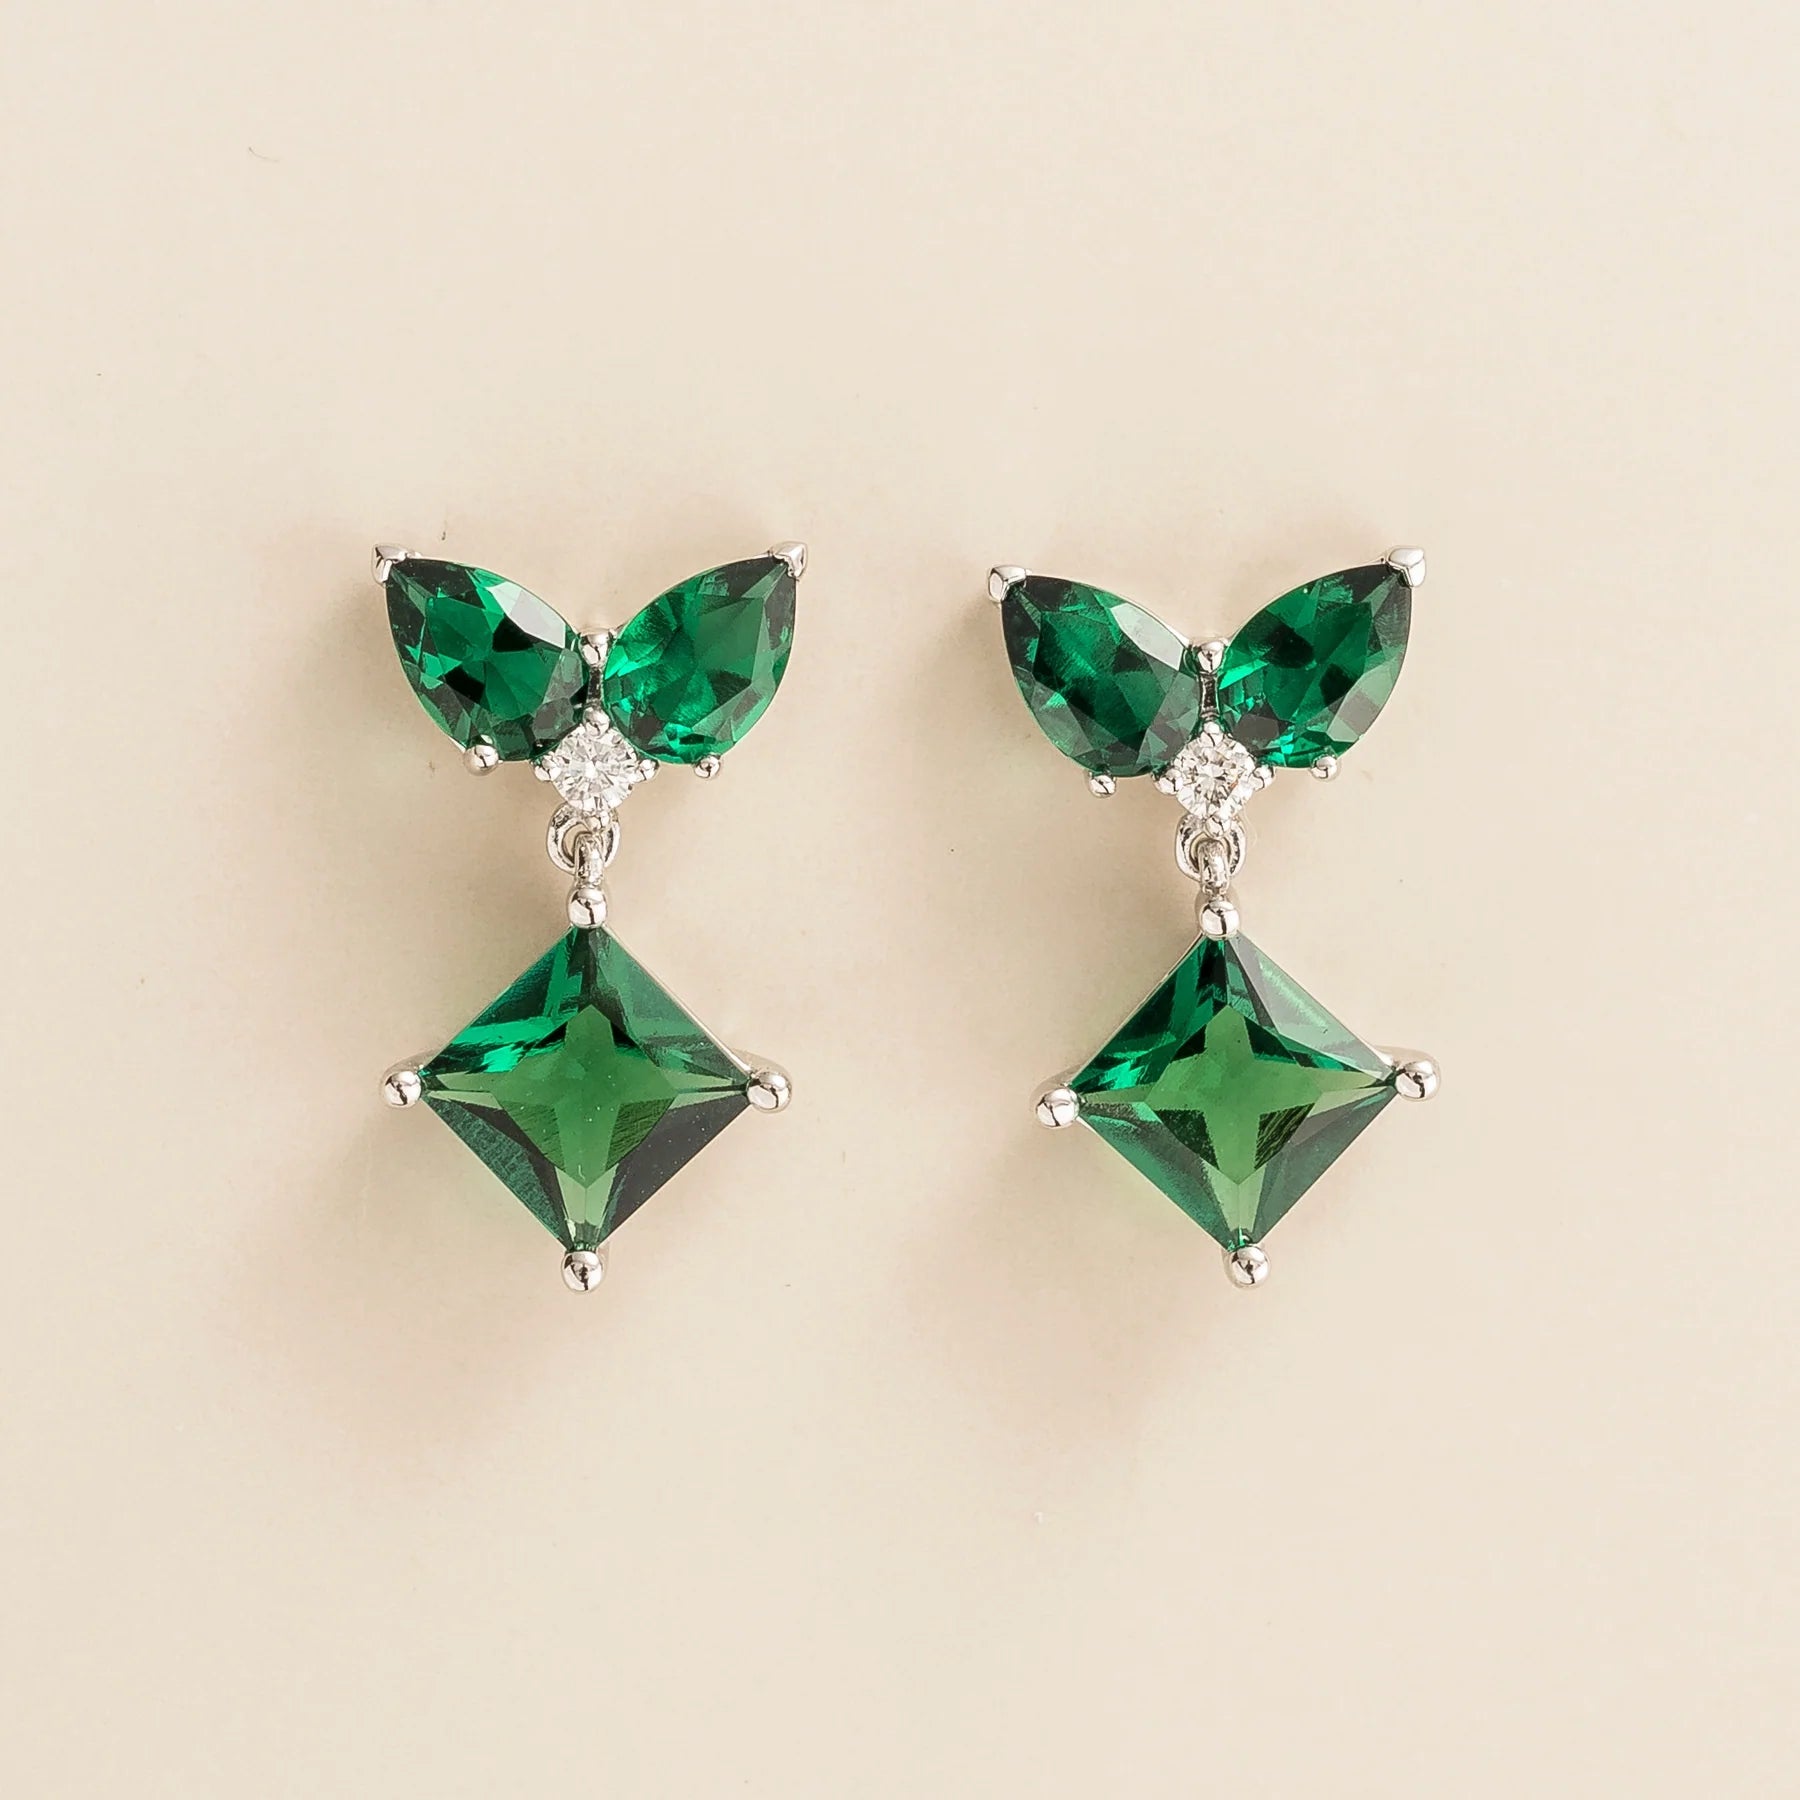 Amore White Gold Earrings Emerald and Diamond By Bespoke Jewellery London